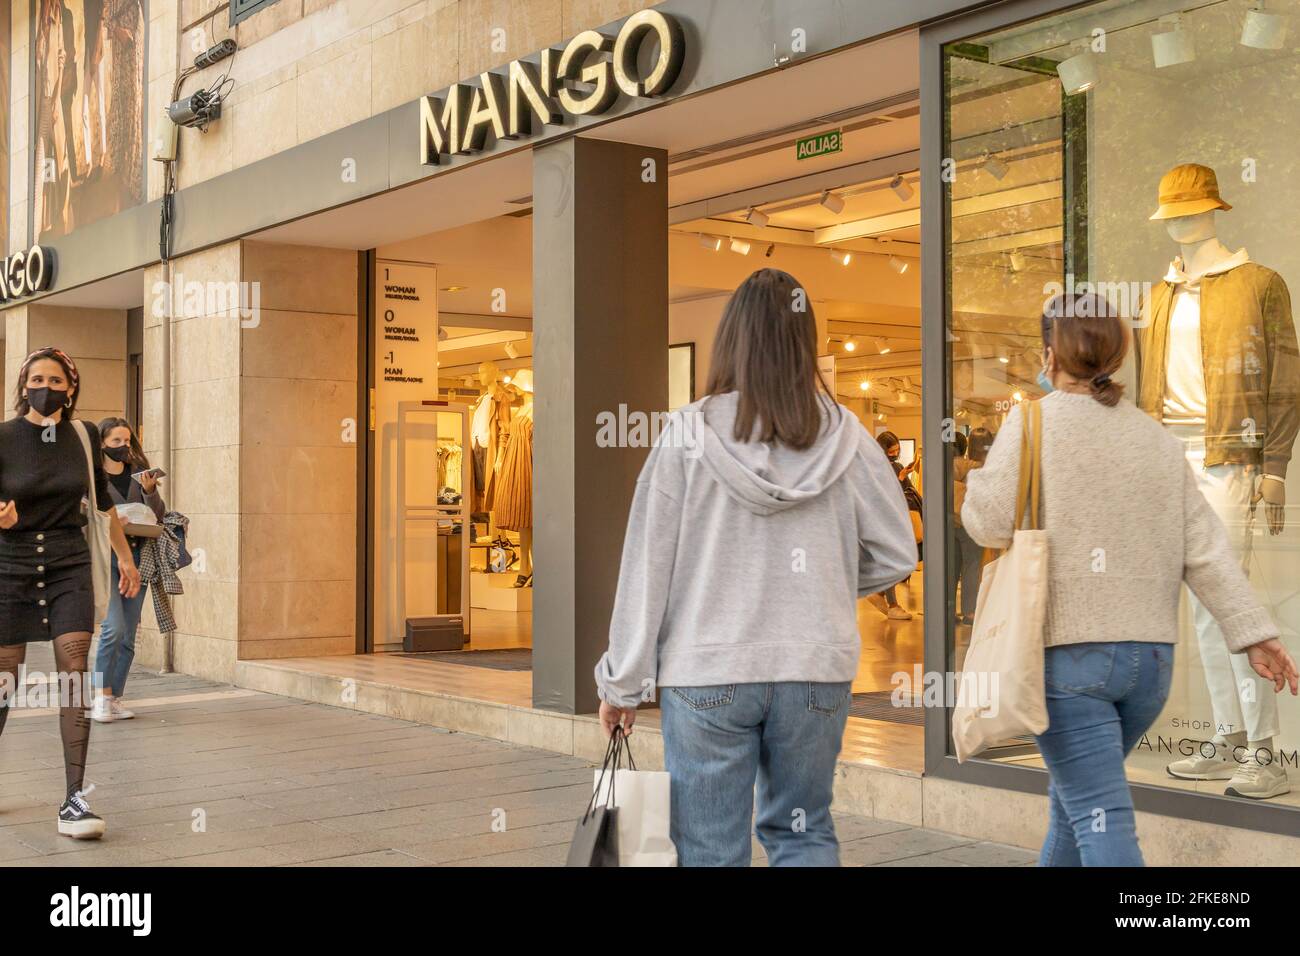 Palma de Mallorca, Spain; april 23 2021: Shop window of a clothing and accessories store belonging to the multinational Mango, with people wearing fac Stock Photo